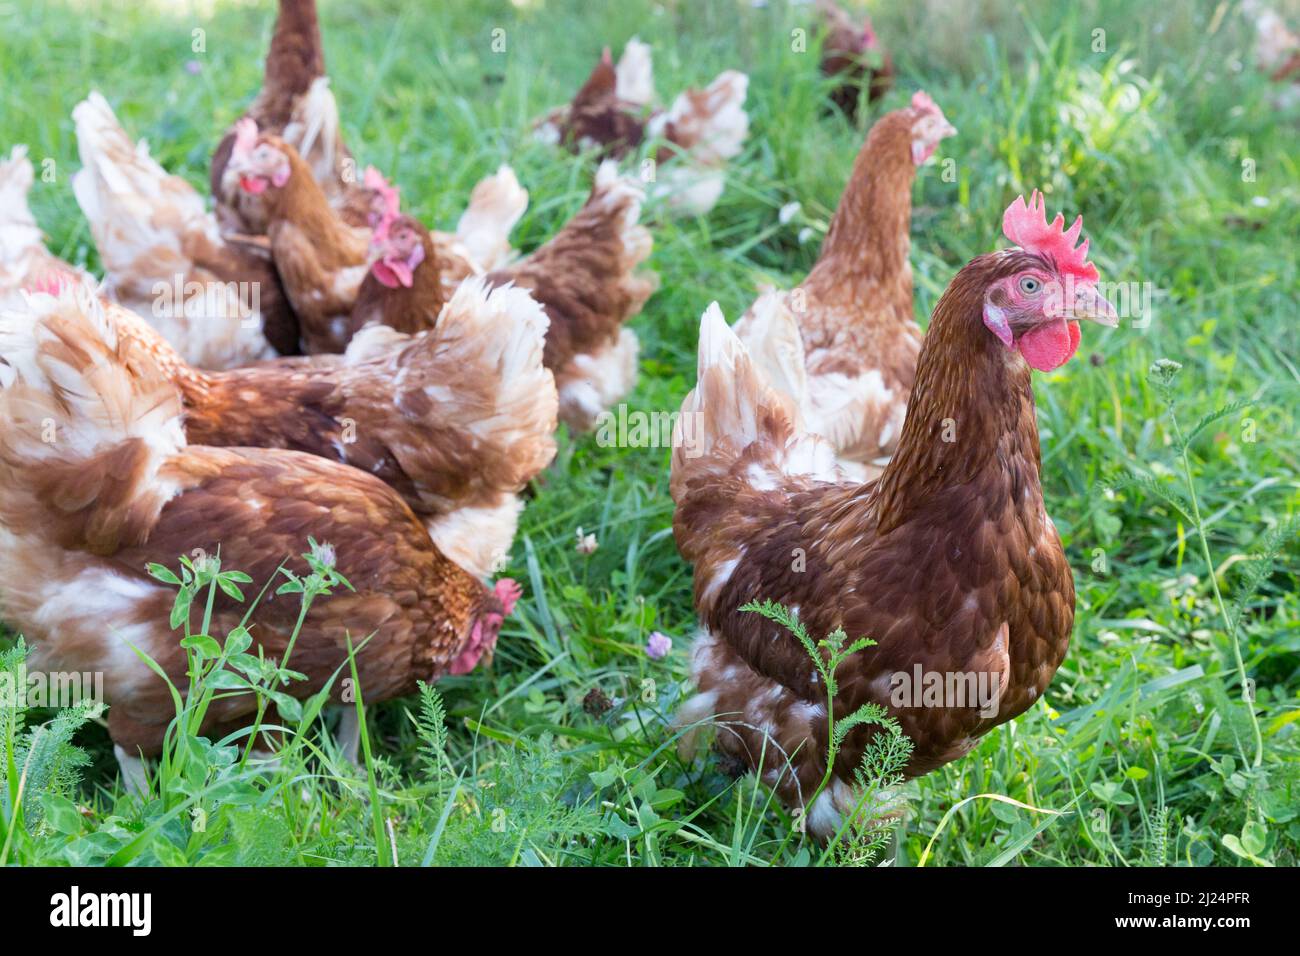 many healthy laying hens walking in green grass on a farm Stock Photo